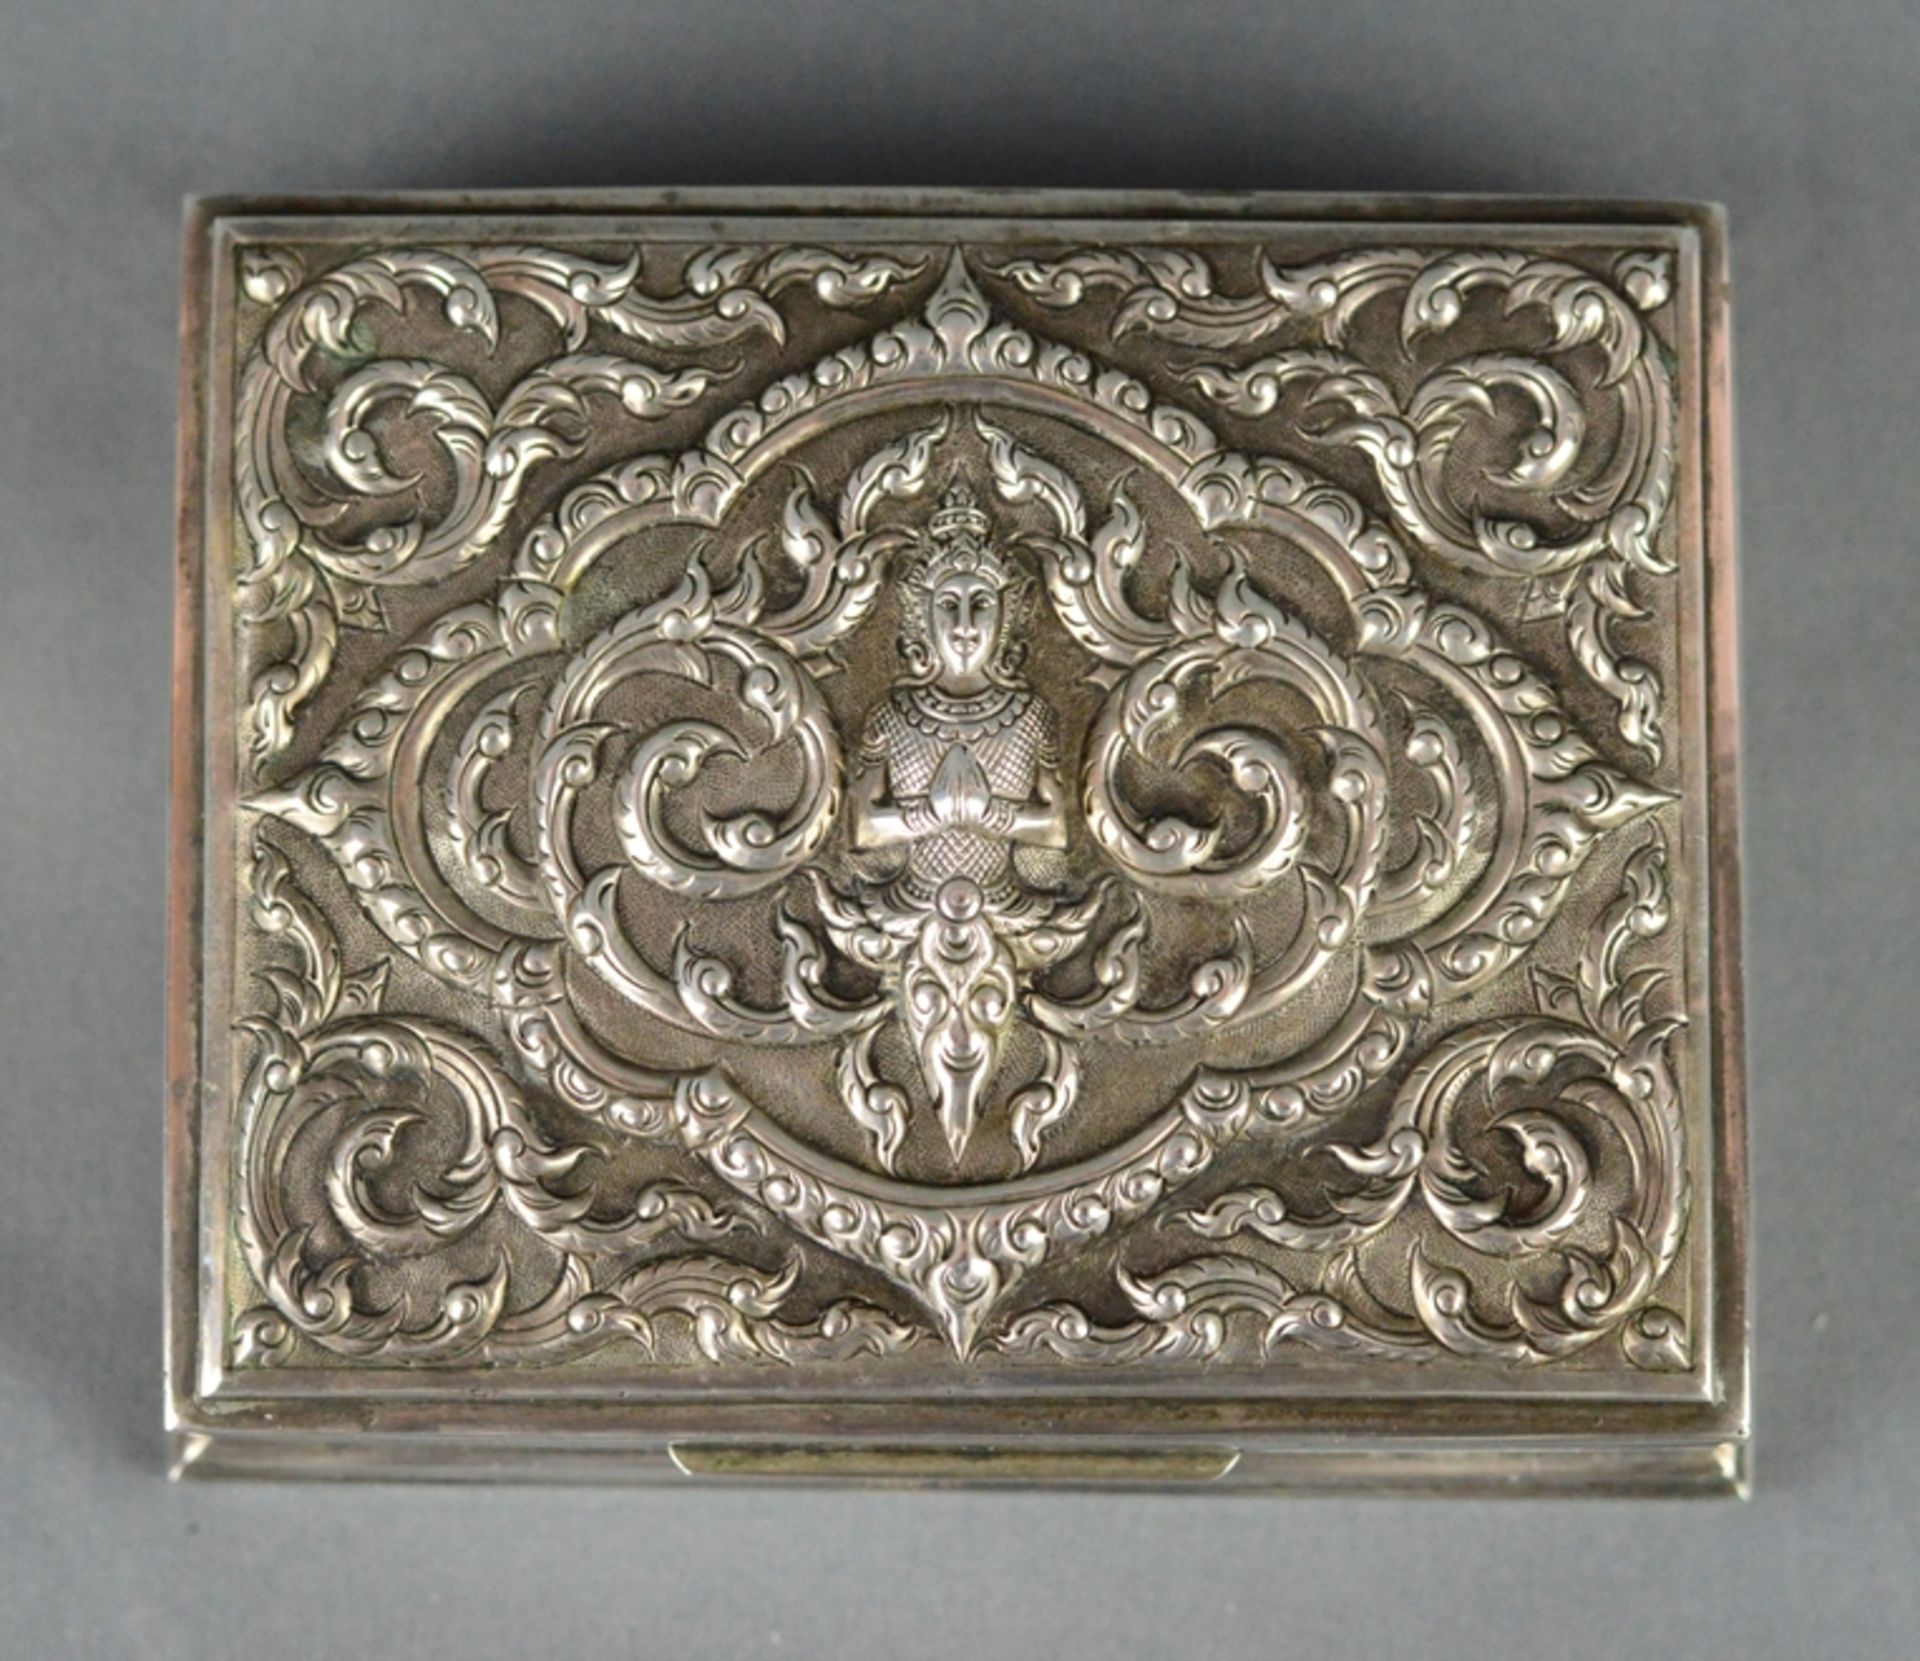 Lidded box with vegetal decoration, centered Buddha figure, interior lined with wood, sterling silv - Image 2 of 5